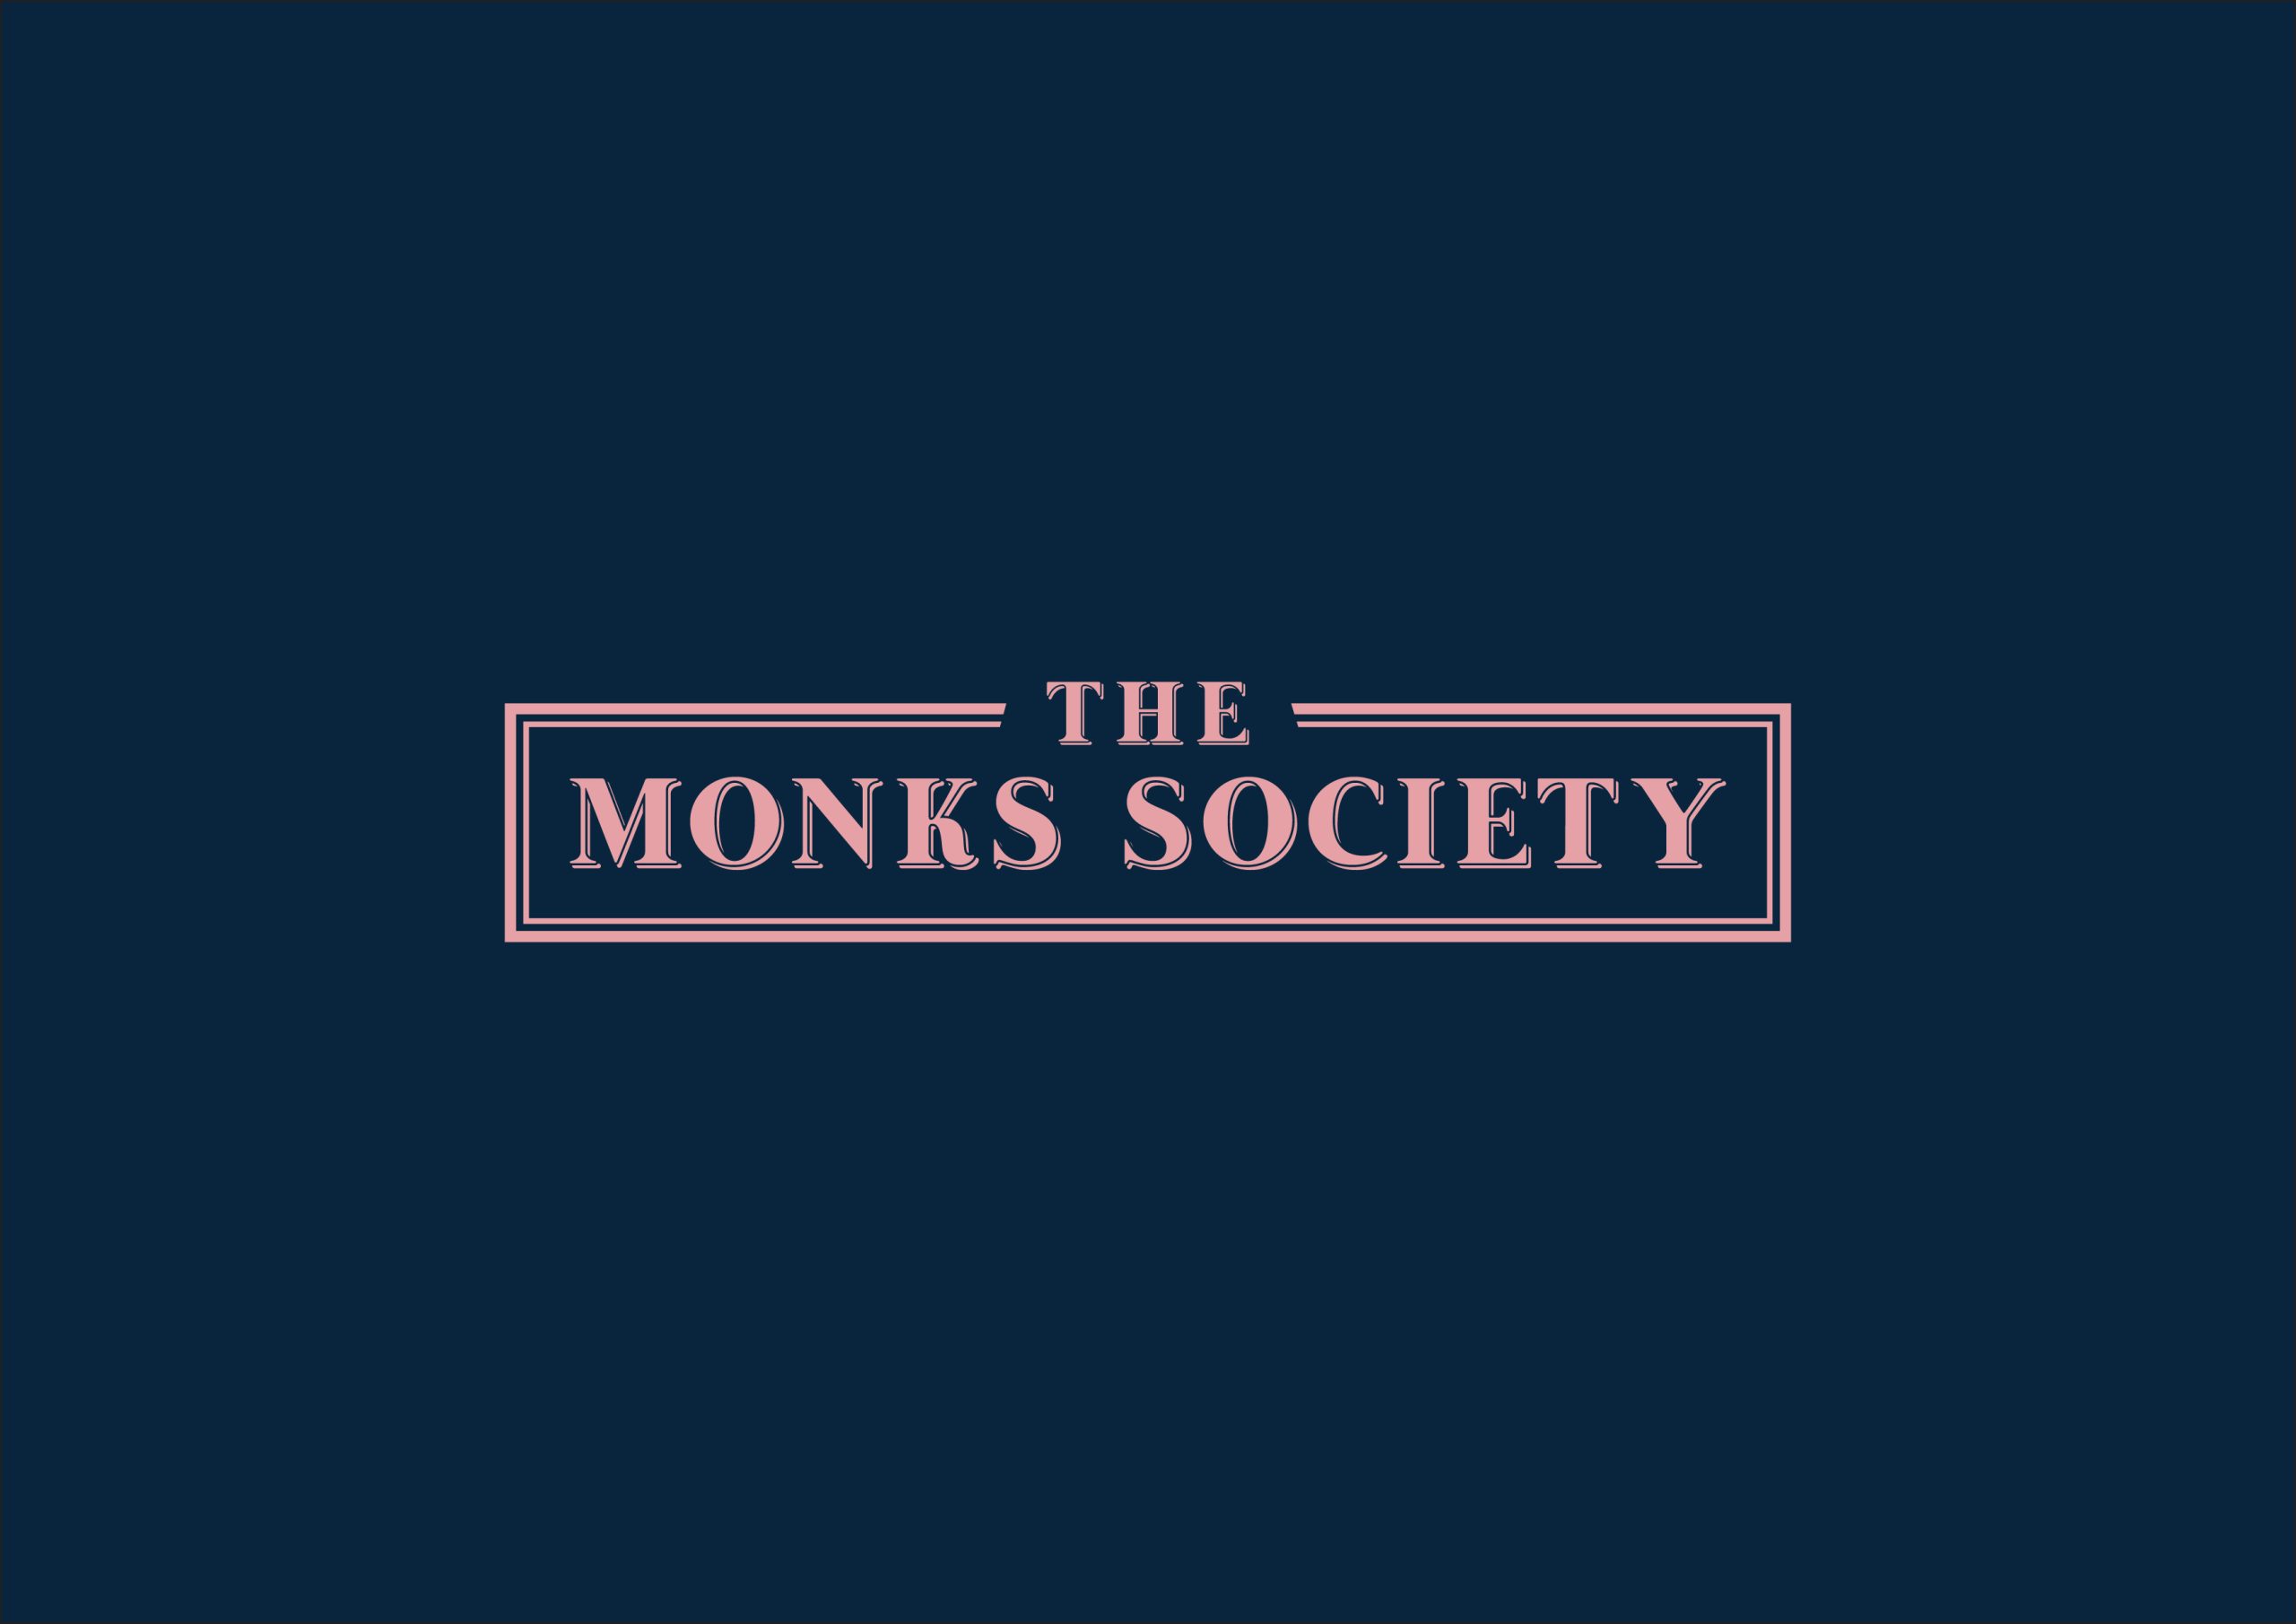 The Monks Society